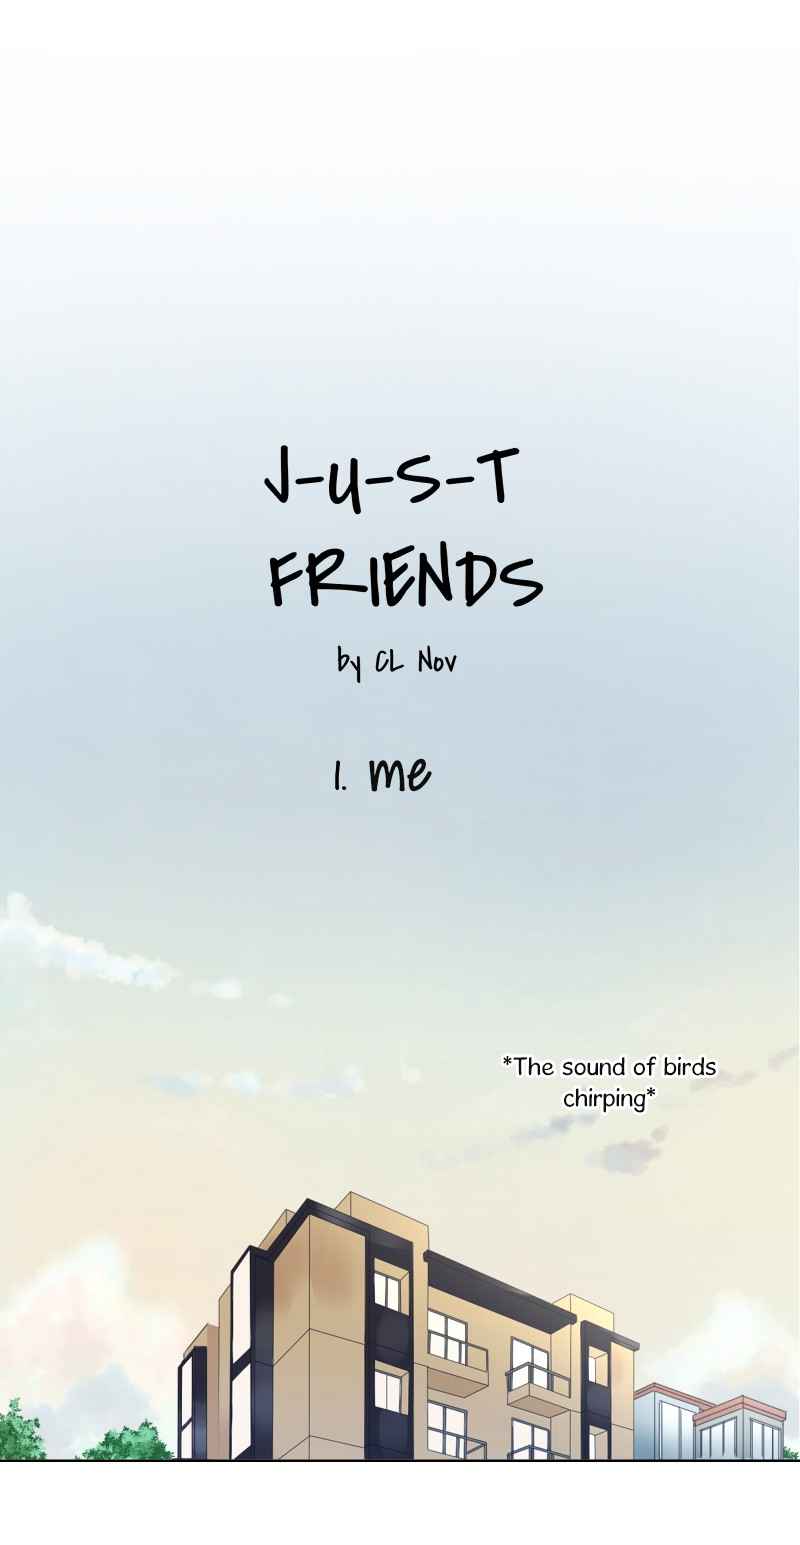 Just Friends Ch. 1 Me